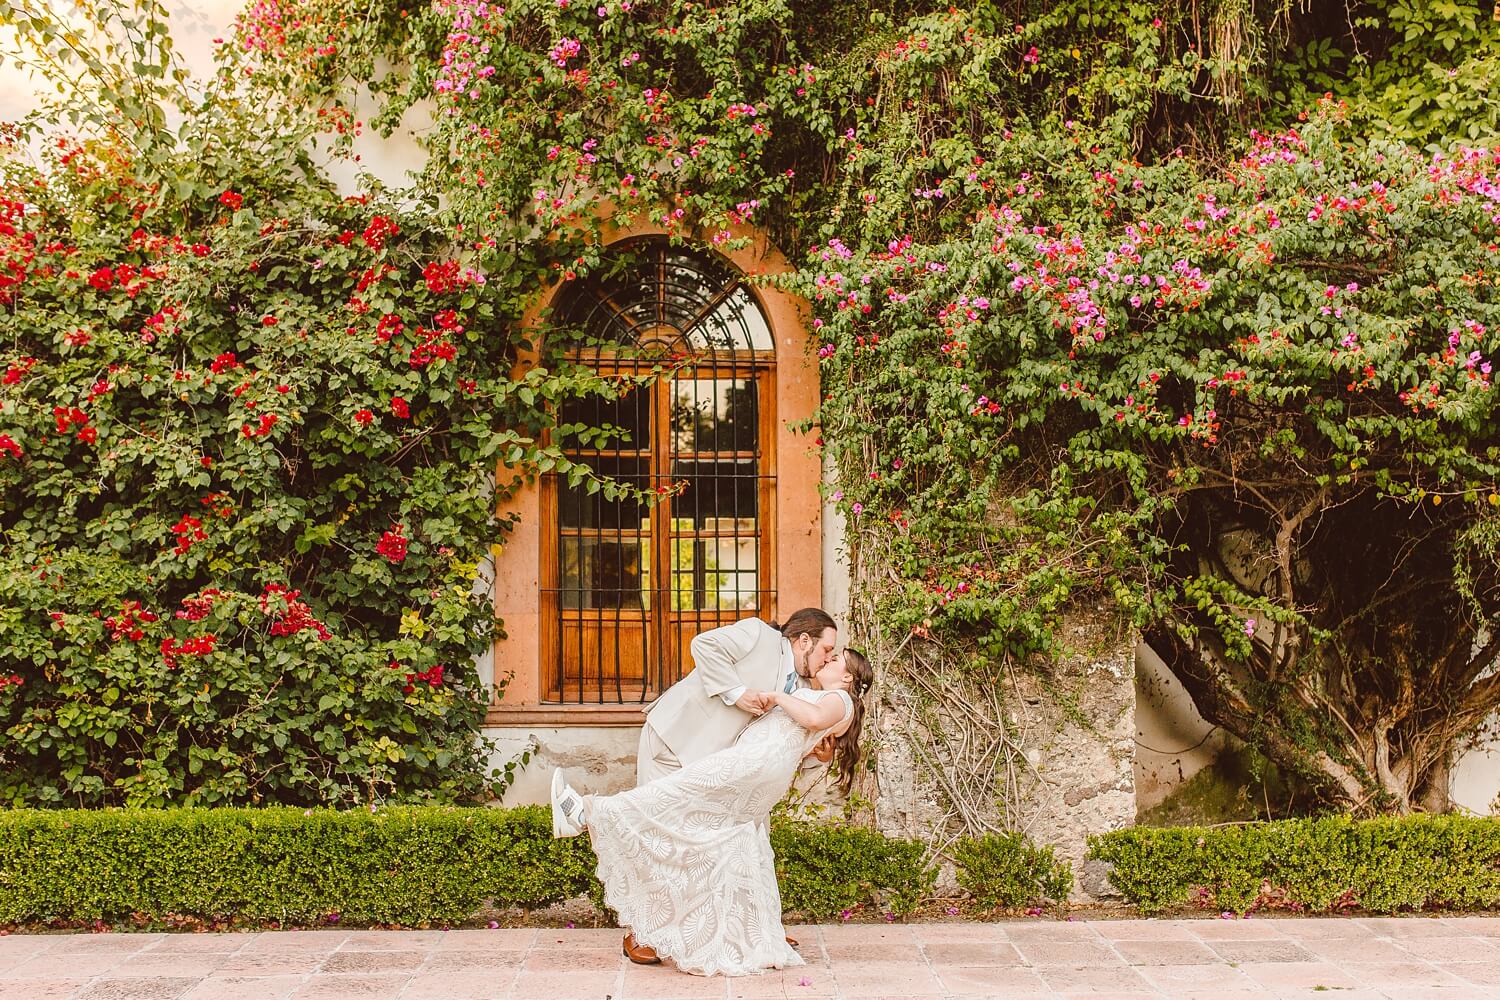 Groom dipping bride and kissing her at Mexico destination wedding | Brooke Michelle Photo